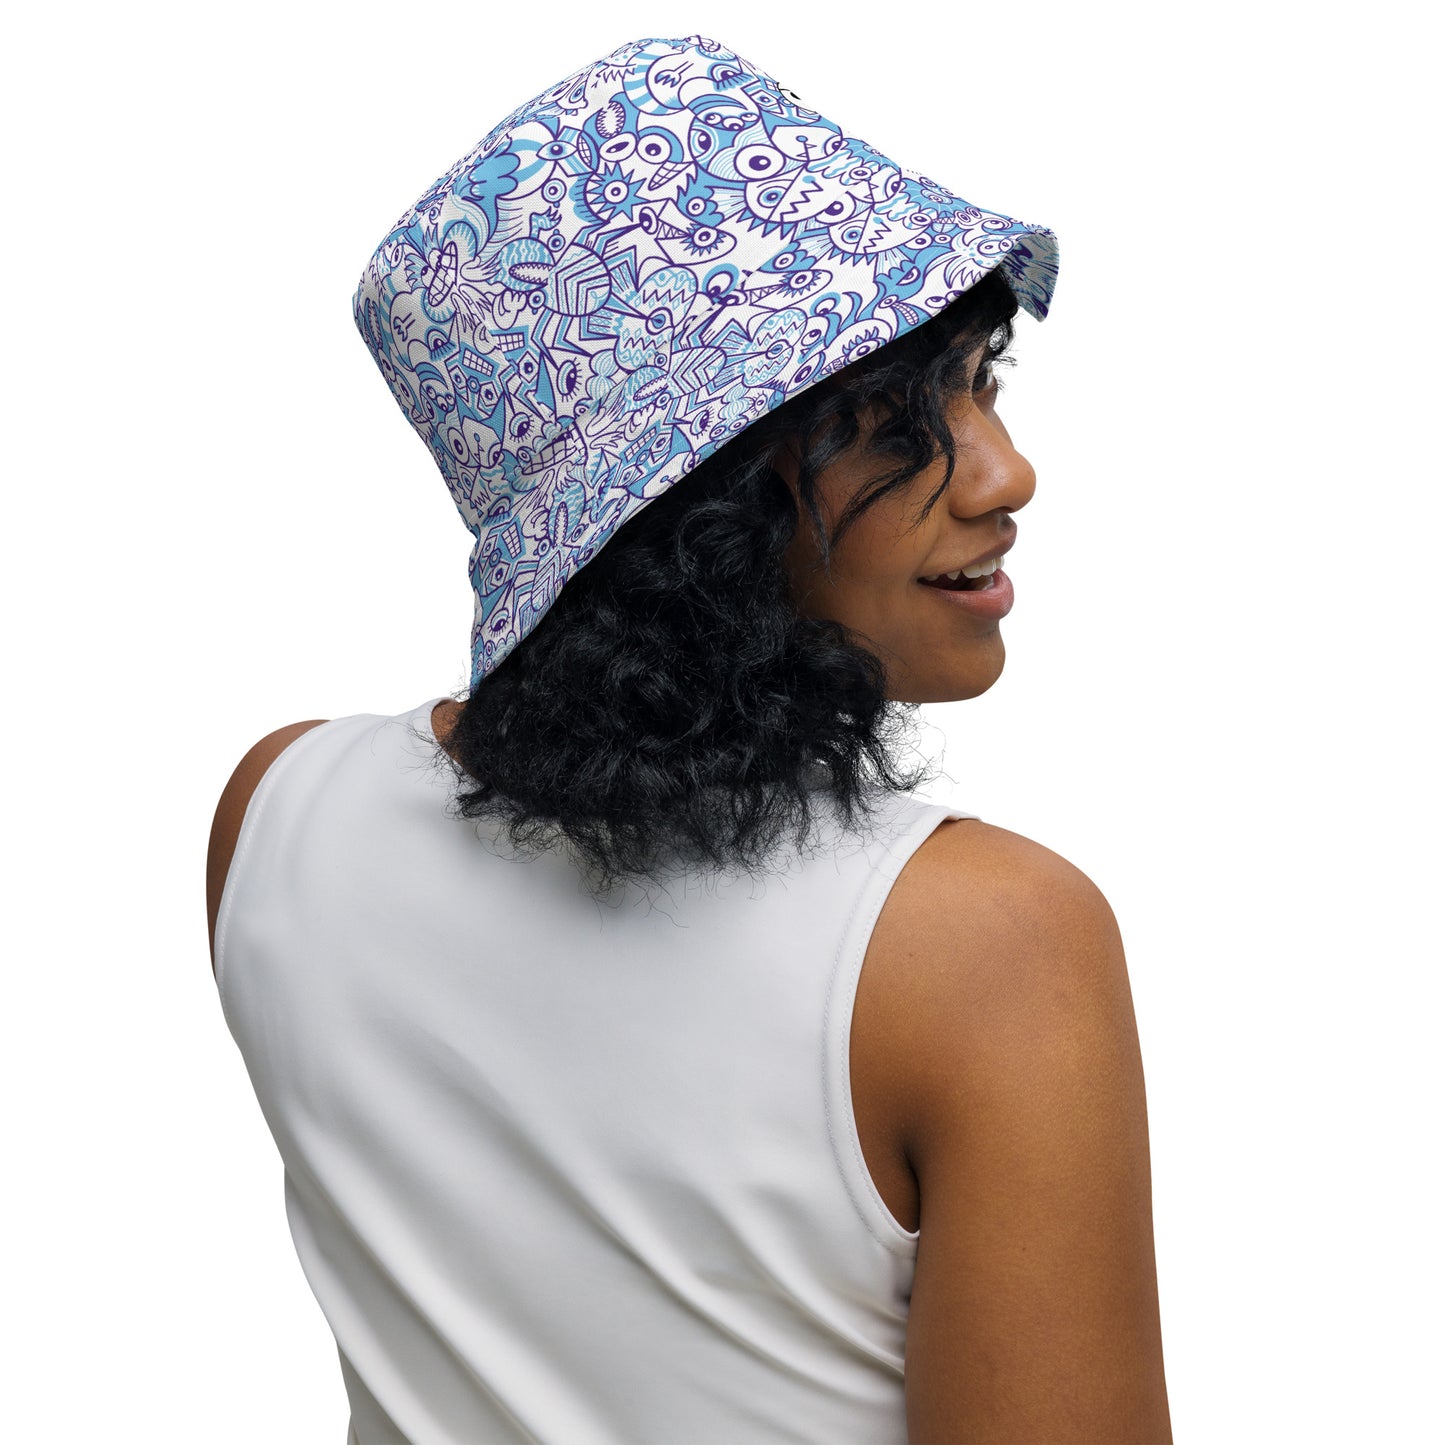 Whimsical Blue Doodle Critterscape pattern design Reversible bucket hat. Right outside view